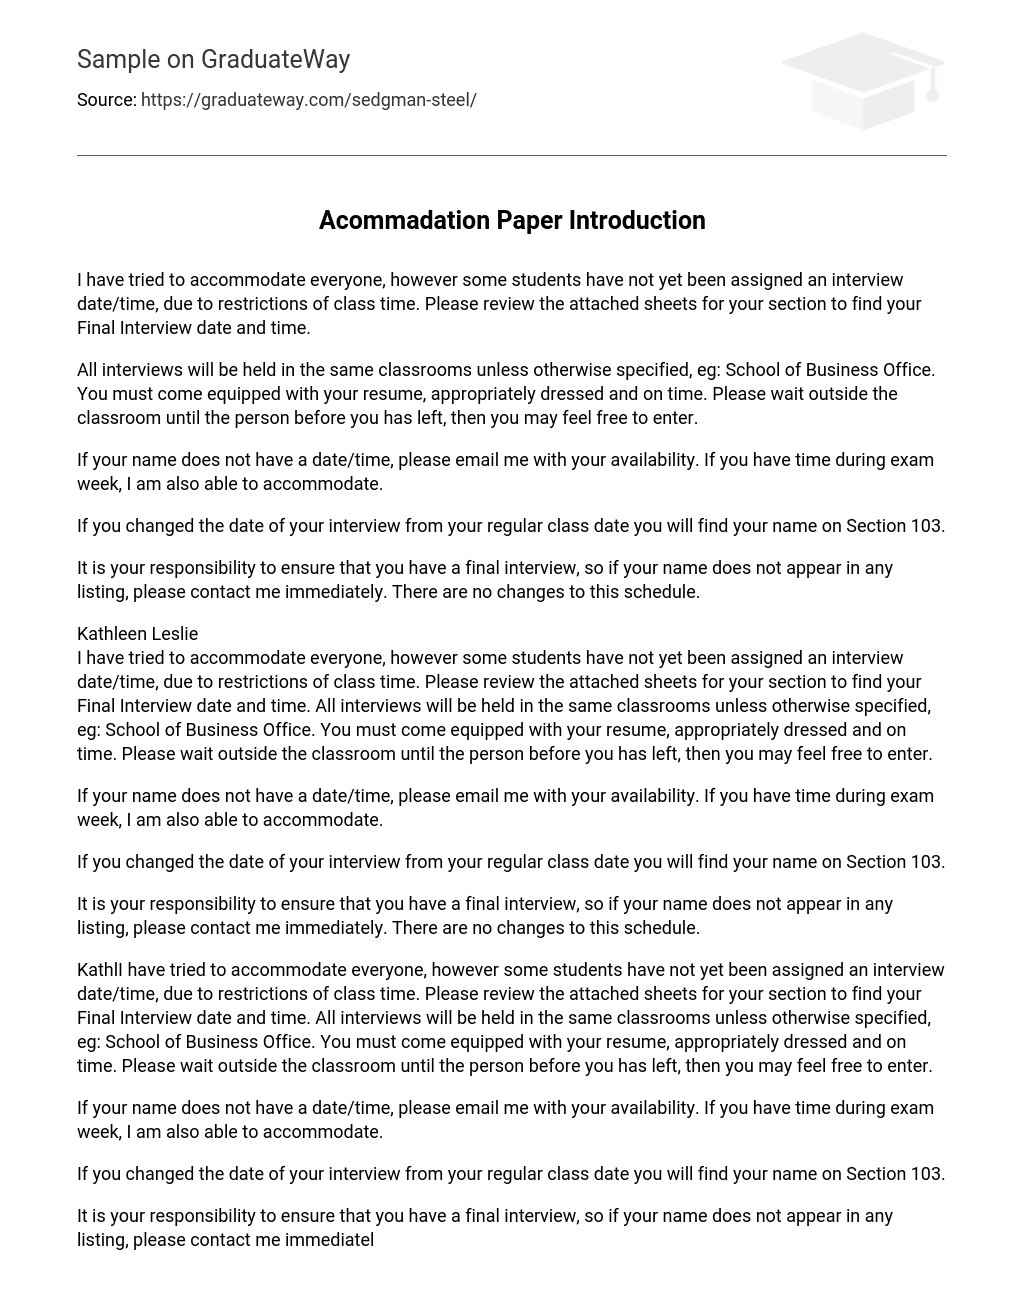 Acommadation Paper Introduction